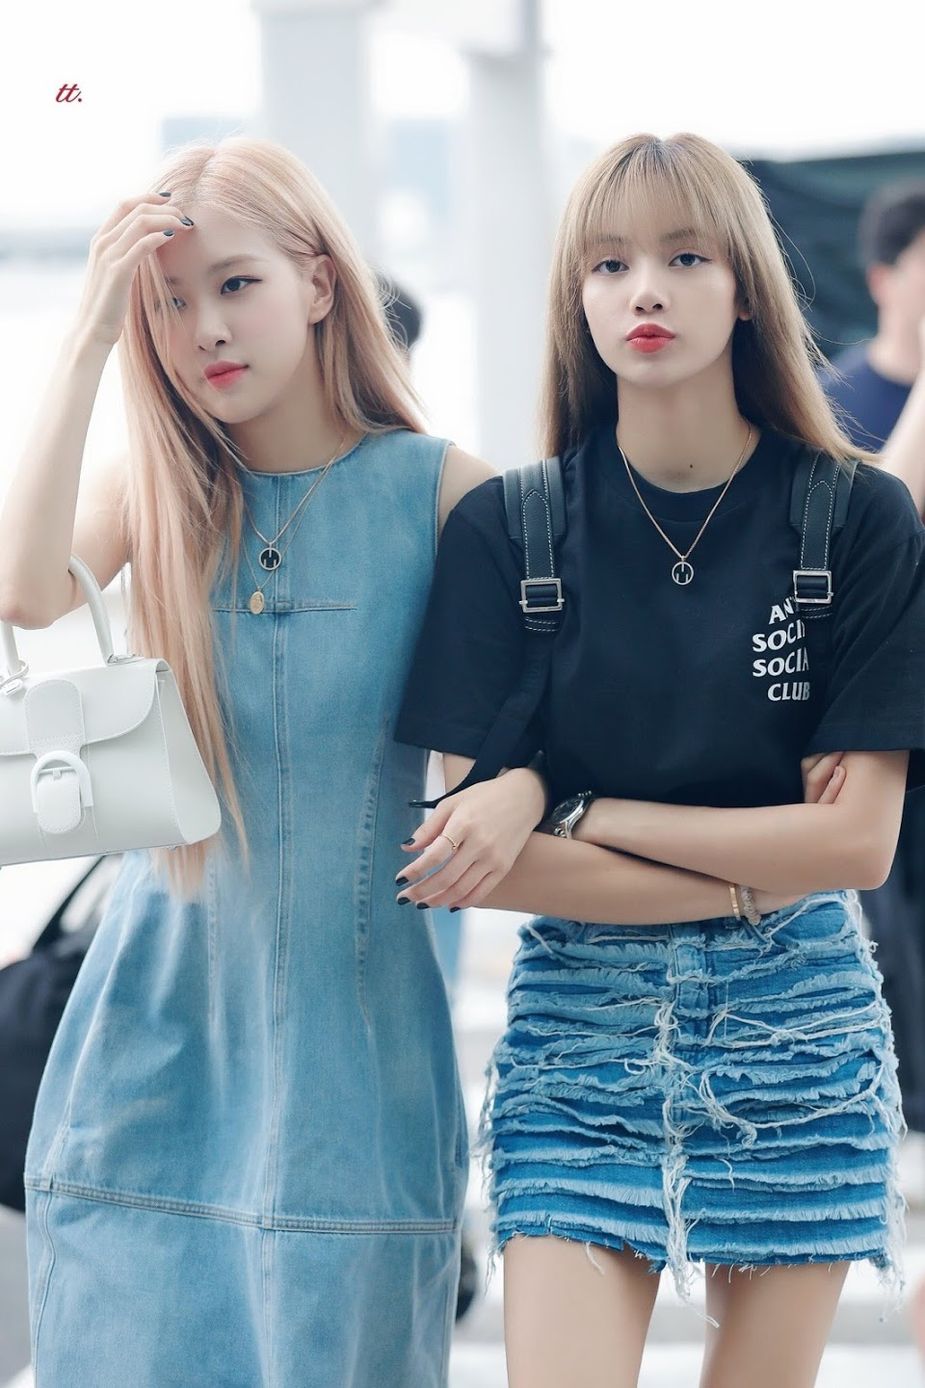 BLACKPINK's Lisa And Rosé To Finally Make Their Solo Debuts - Koreaboo